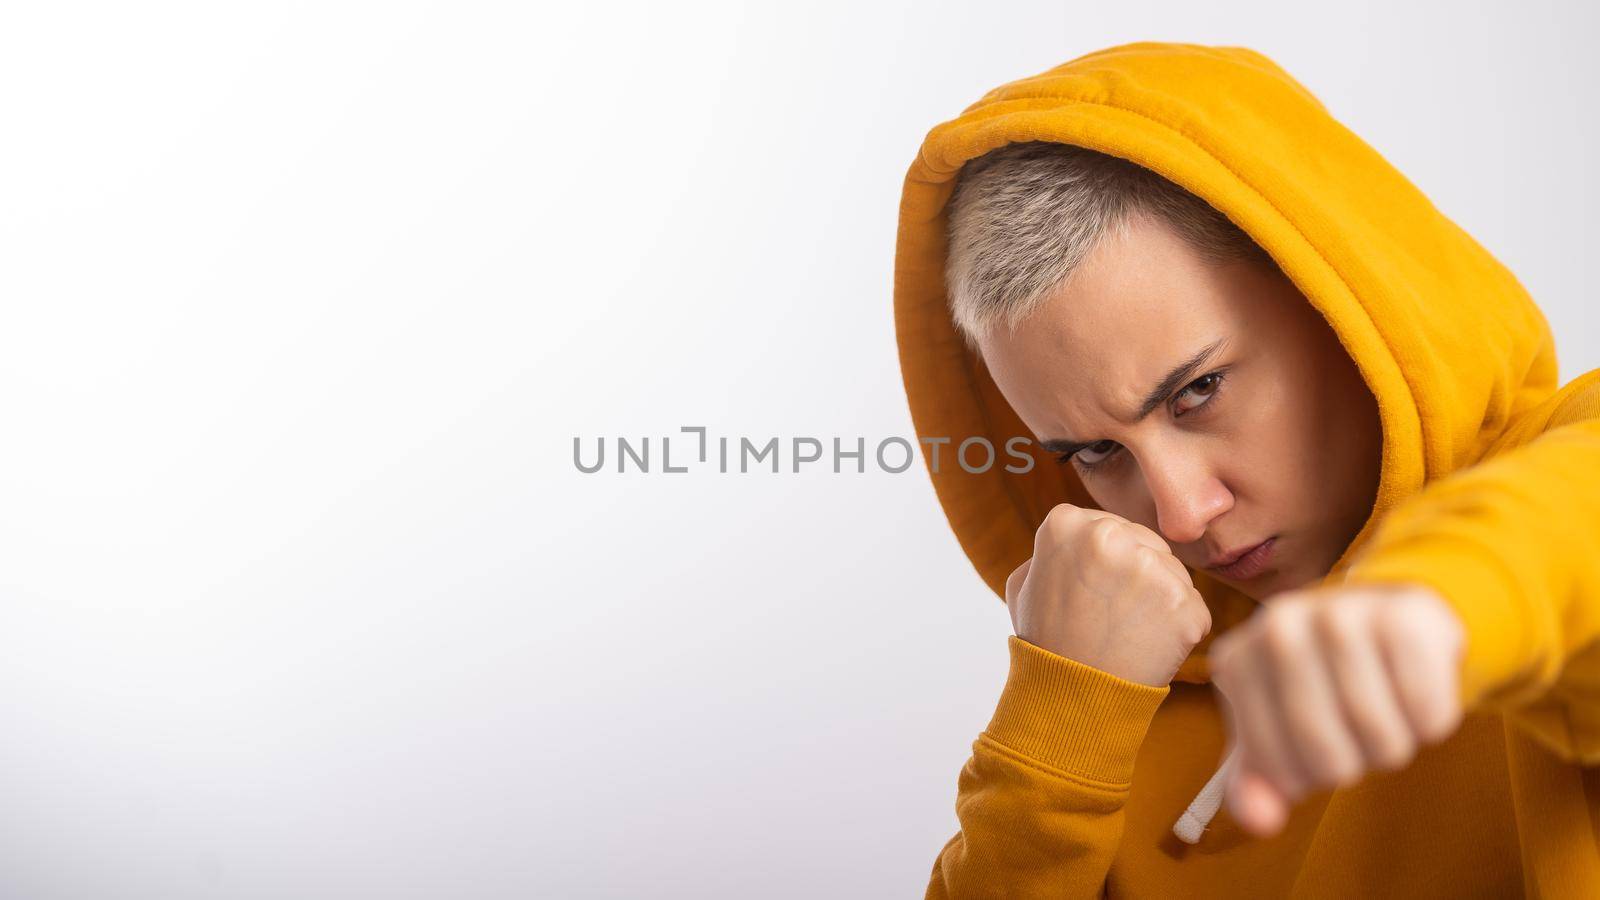 Young woman in ocher hood holding fists near face on white background. Boxer girl is ready for a fight